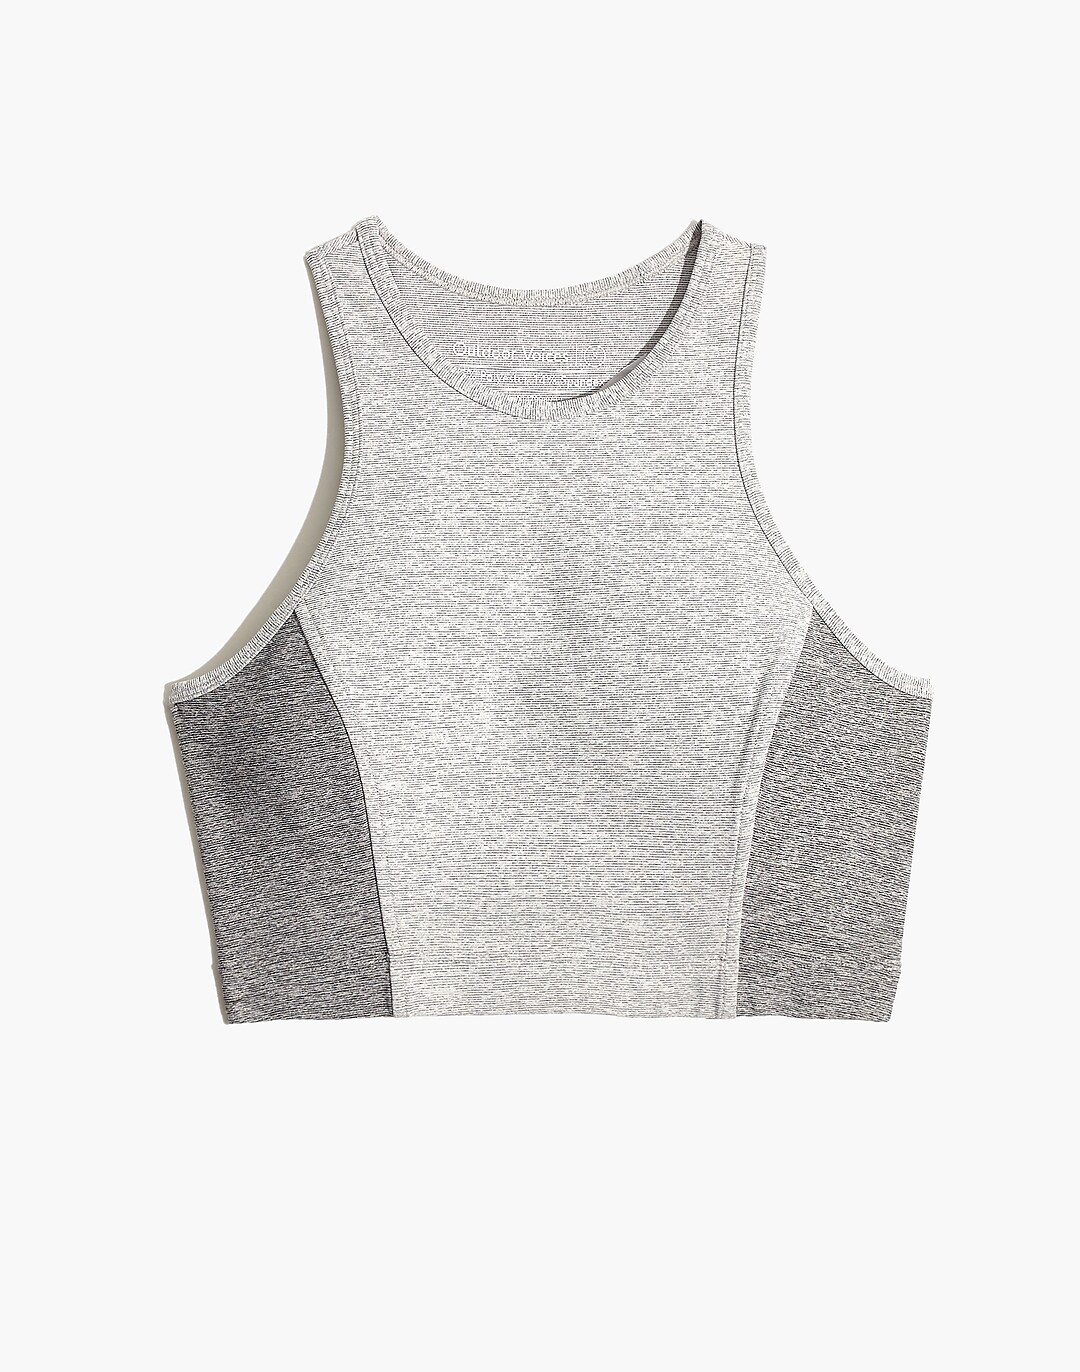 Outdoor Voices Athena Sports Bra Crop Top Size XS High-neck Longline Gray -  $29 - From Rachael